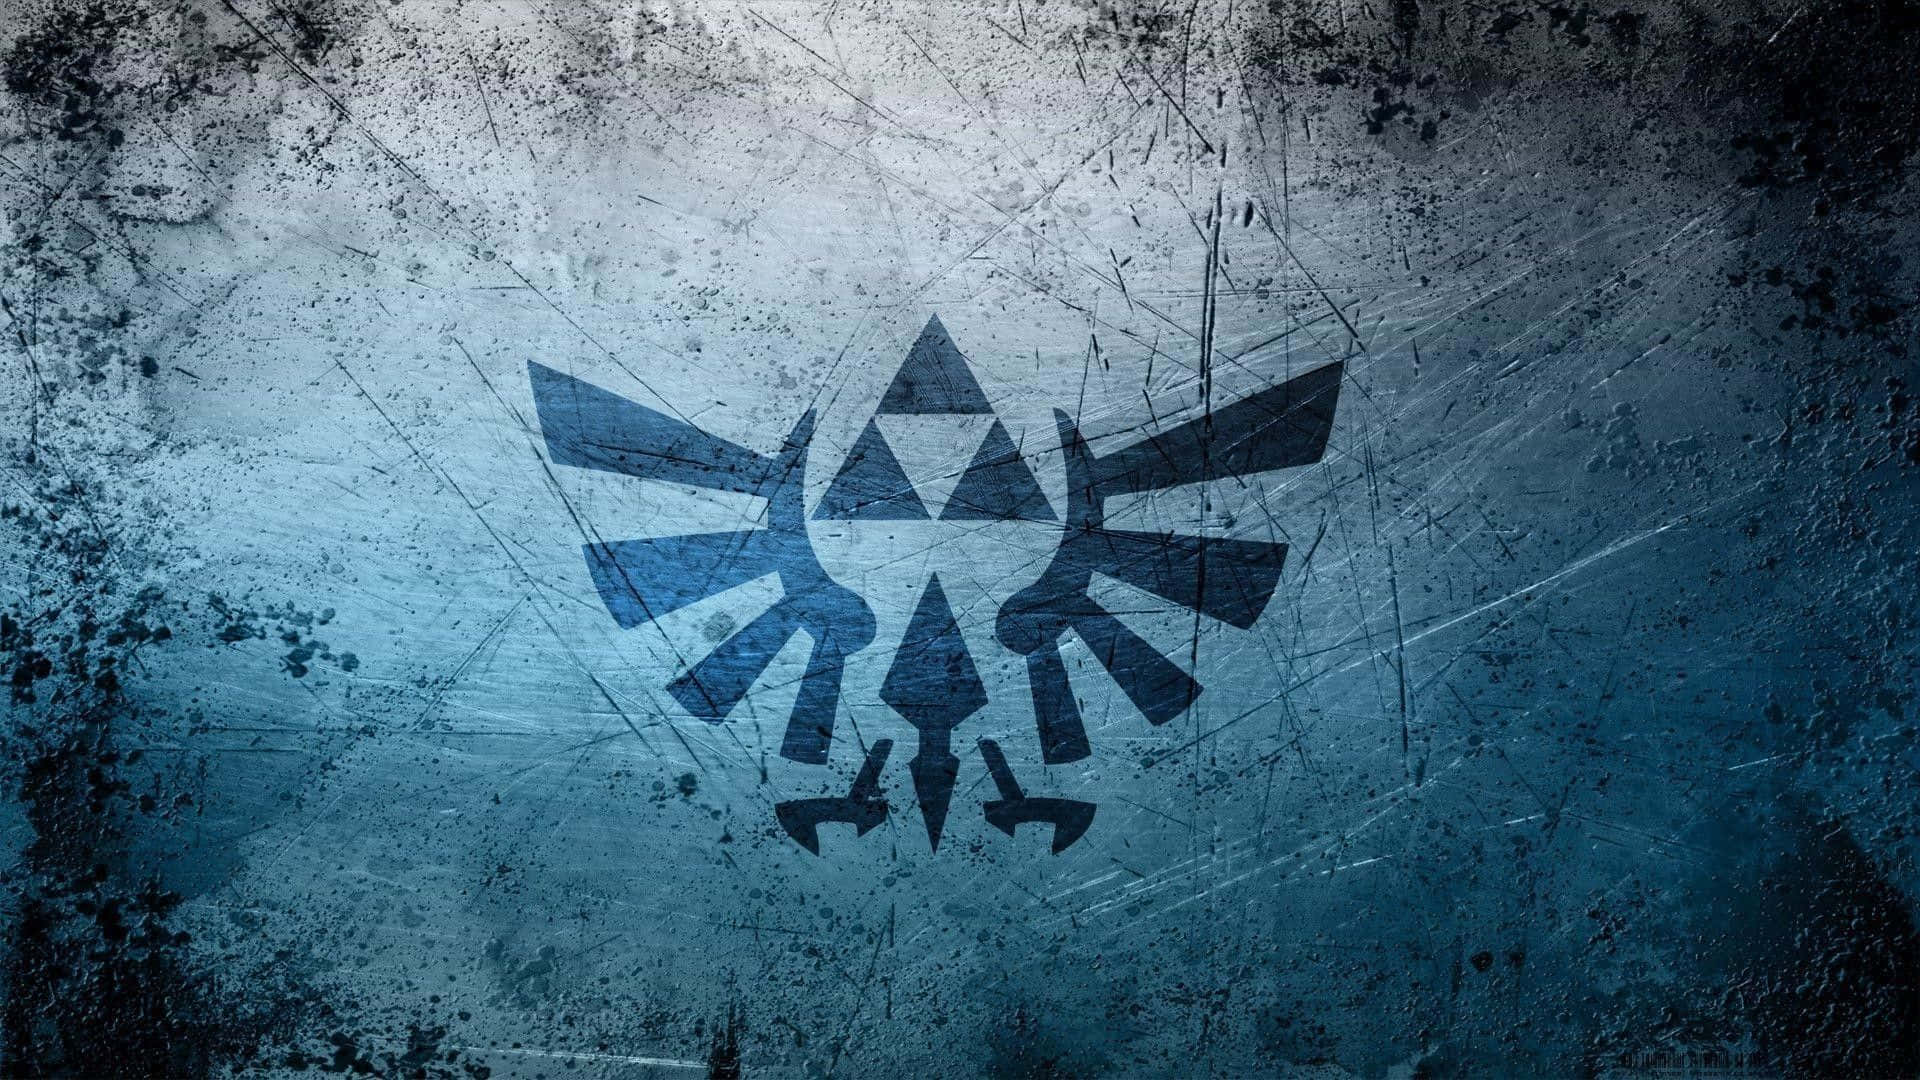 Three Sacred Triangles Of Power And Wisdom, Forming The Iconic Triforce. Background